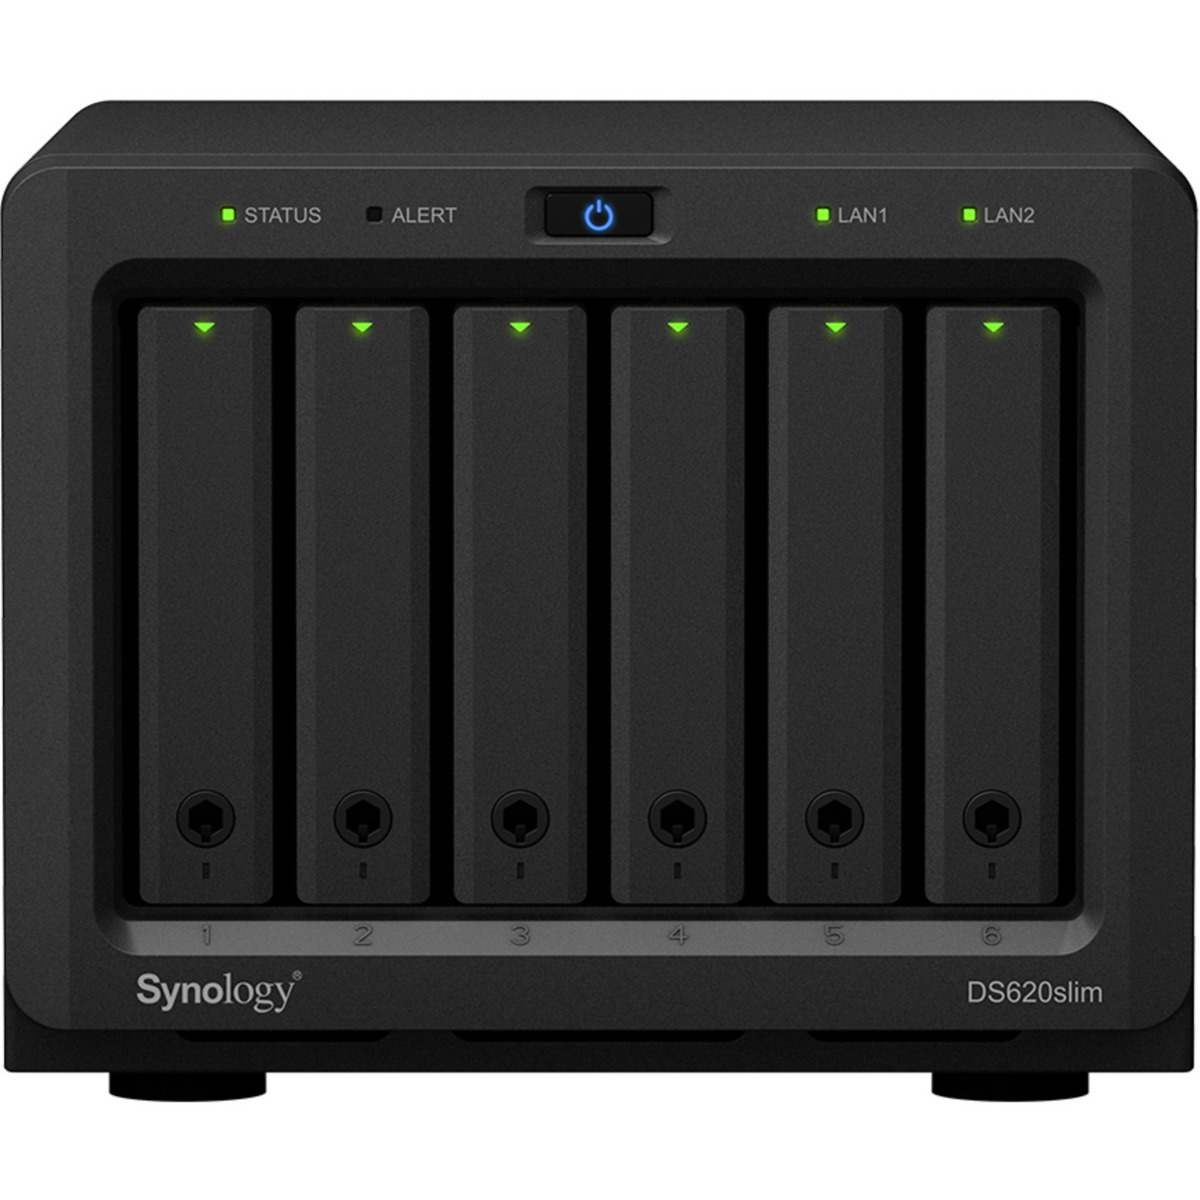 buy $1226 Synology DiskStation DS620slim 3tb Desktop NAS - Network Attached Storage Device 6x500gb Samsung 870 EVO MZ-77E500BAM 2.5 SATA 6Gb/s SSD CONSUMER Class Drives Installed - Burn-In Tested - FREE RAM UPGRADE - nas headquarters buy network attached storage server device das new raid-5 free shipping usa christmas new year holiday sale DiskStation DS620slim